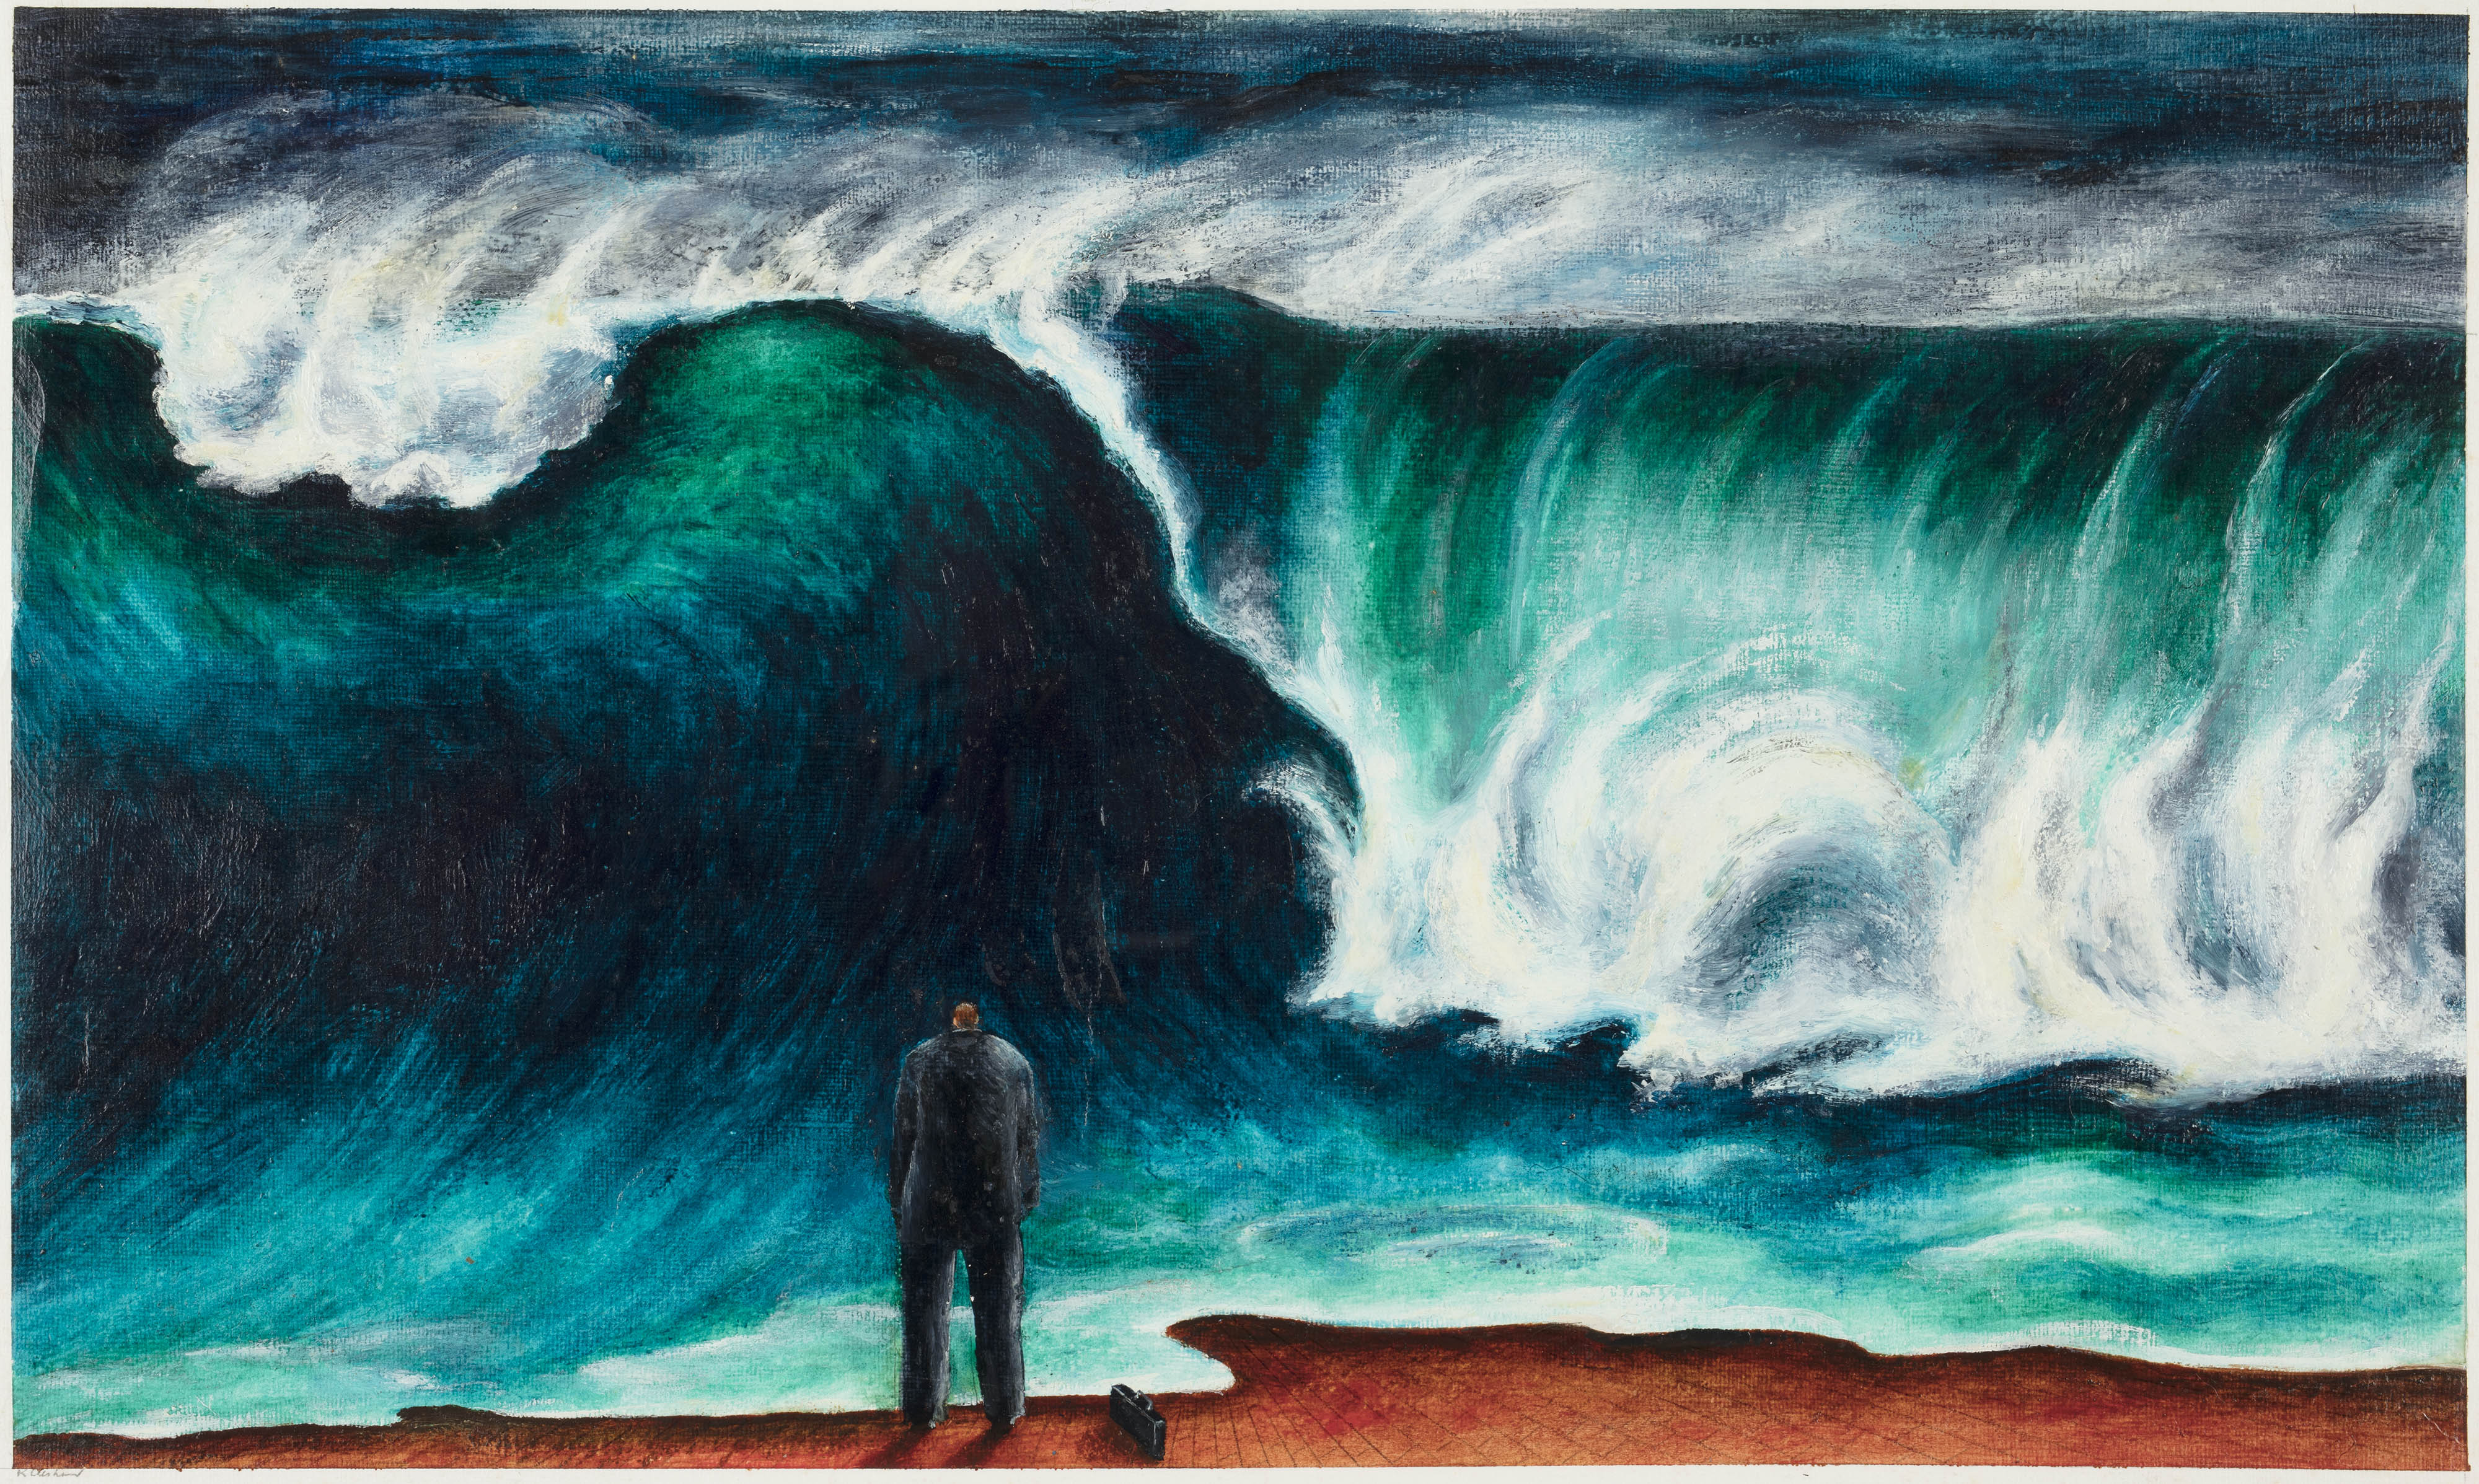 'The next wave', oil paint, Sydney Morning Herald, 30 October 1999